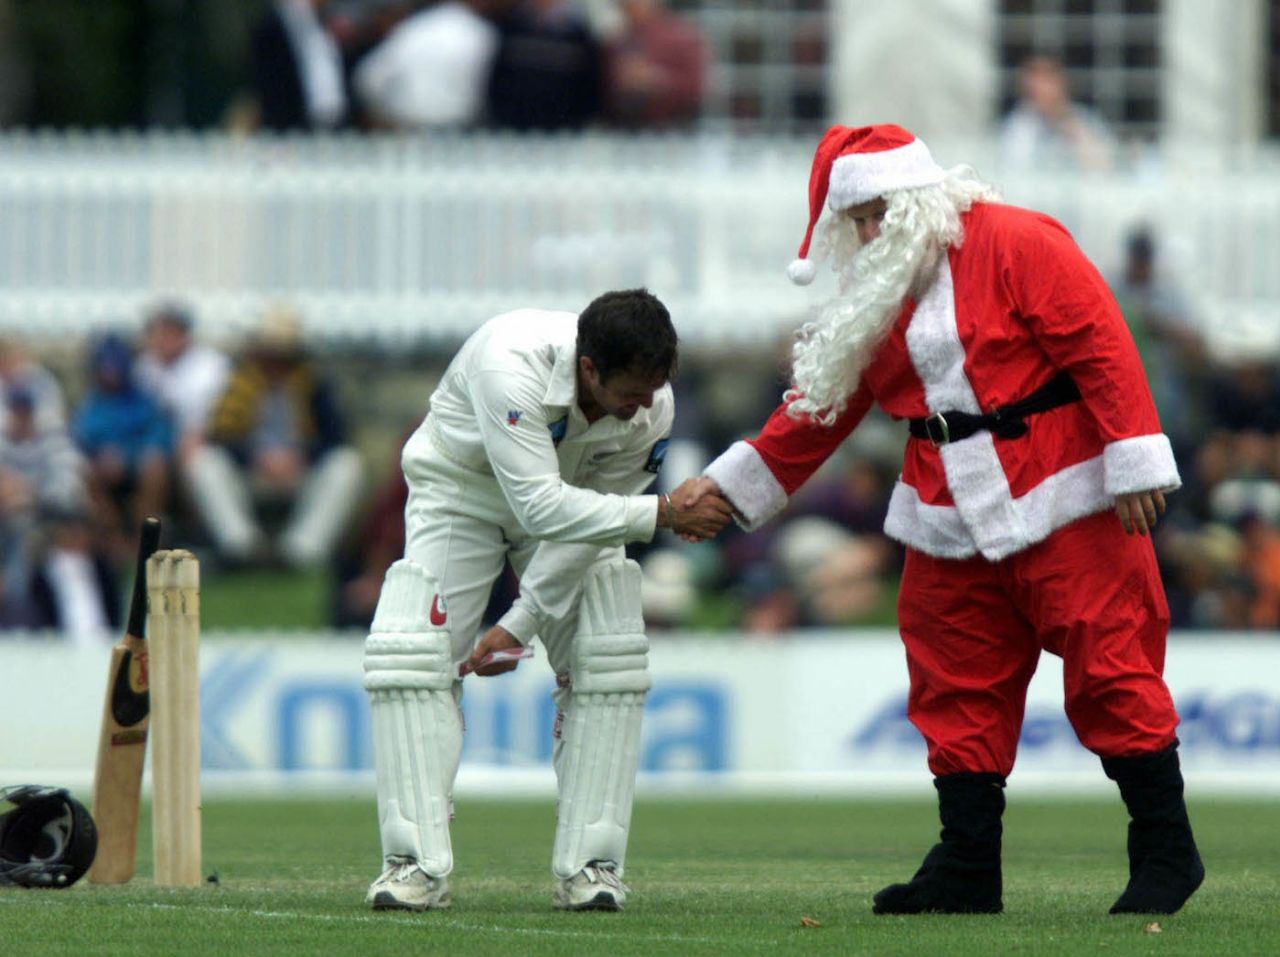 Nathan Astle gets a visit from Santa, Tour Match, Prime Minister's XI v New Zealanders, Canberra, Oct 23 2015